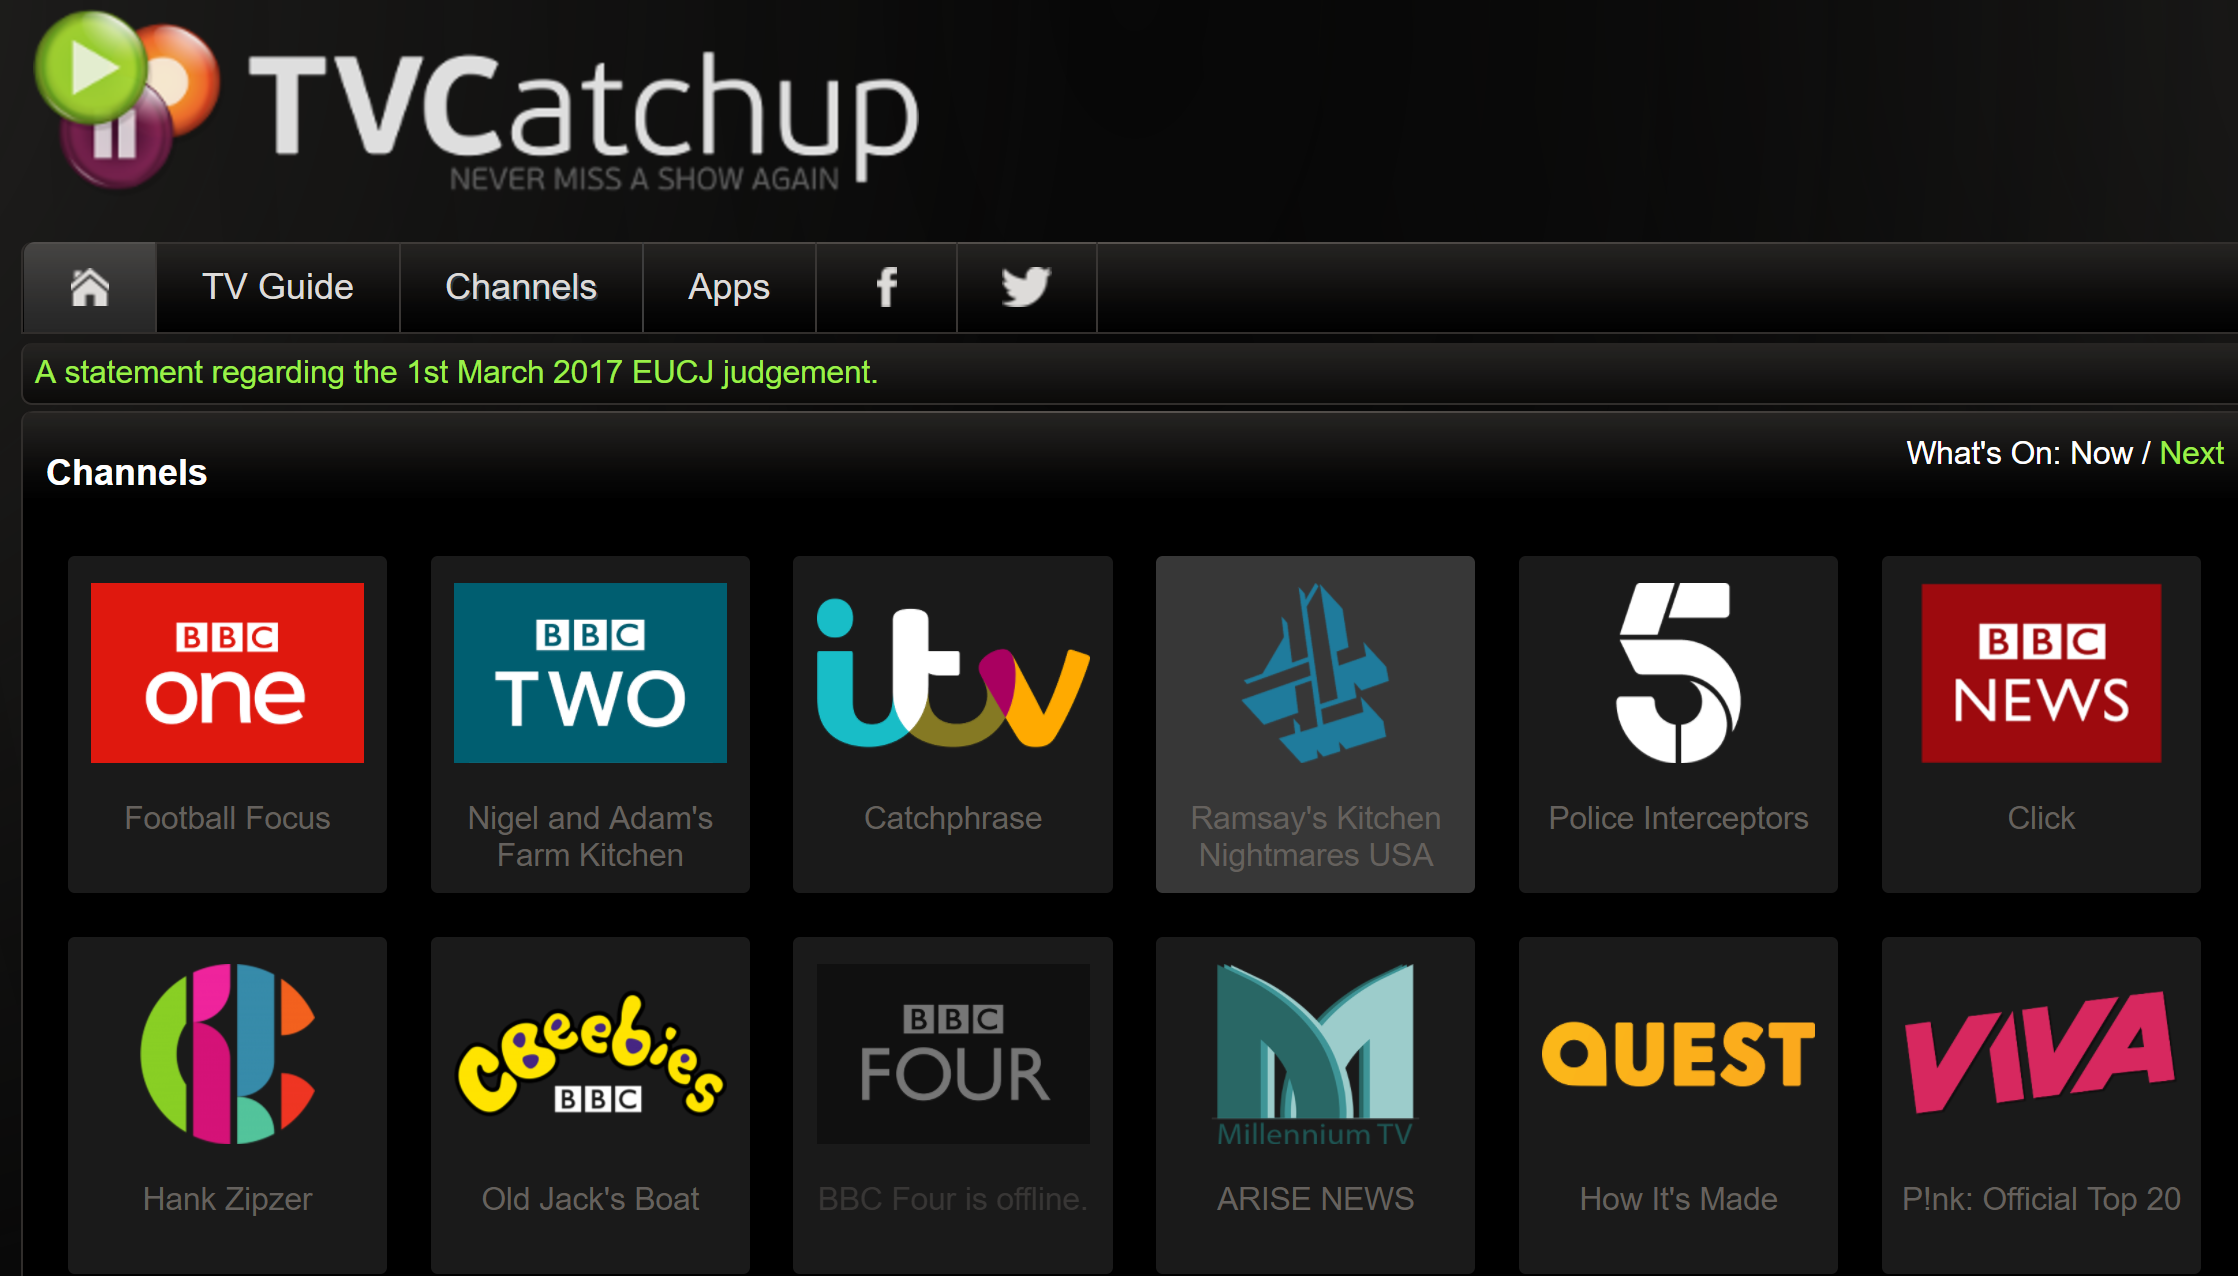 Good live tv. Catch up TV. Catch-up TV channels. Catch up TV Ч.